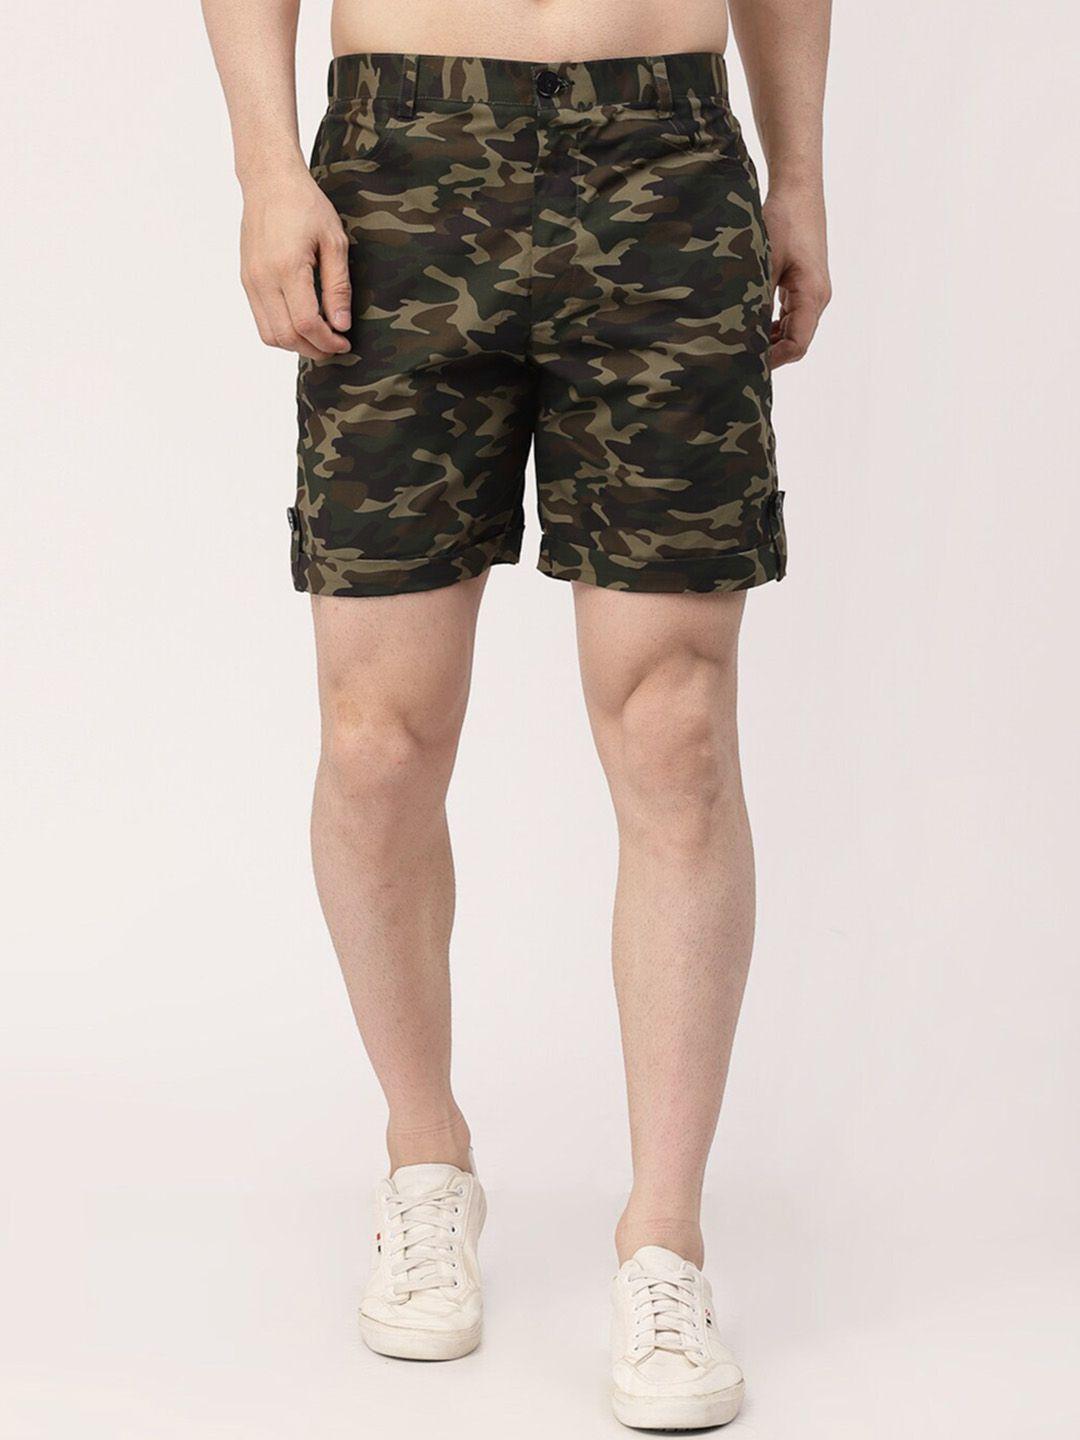 klotthe men camouflage printed mid-rise rapid dry cotton cargo shorts